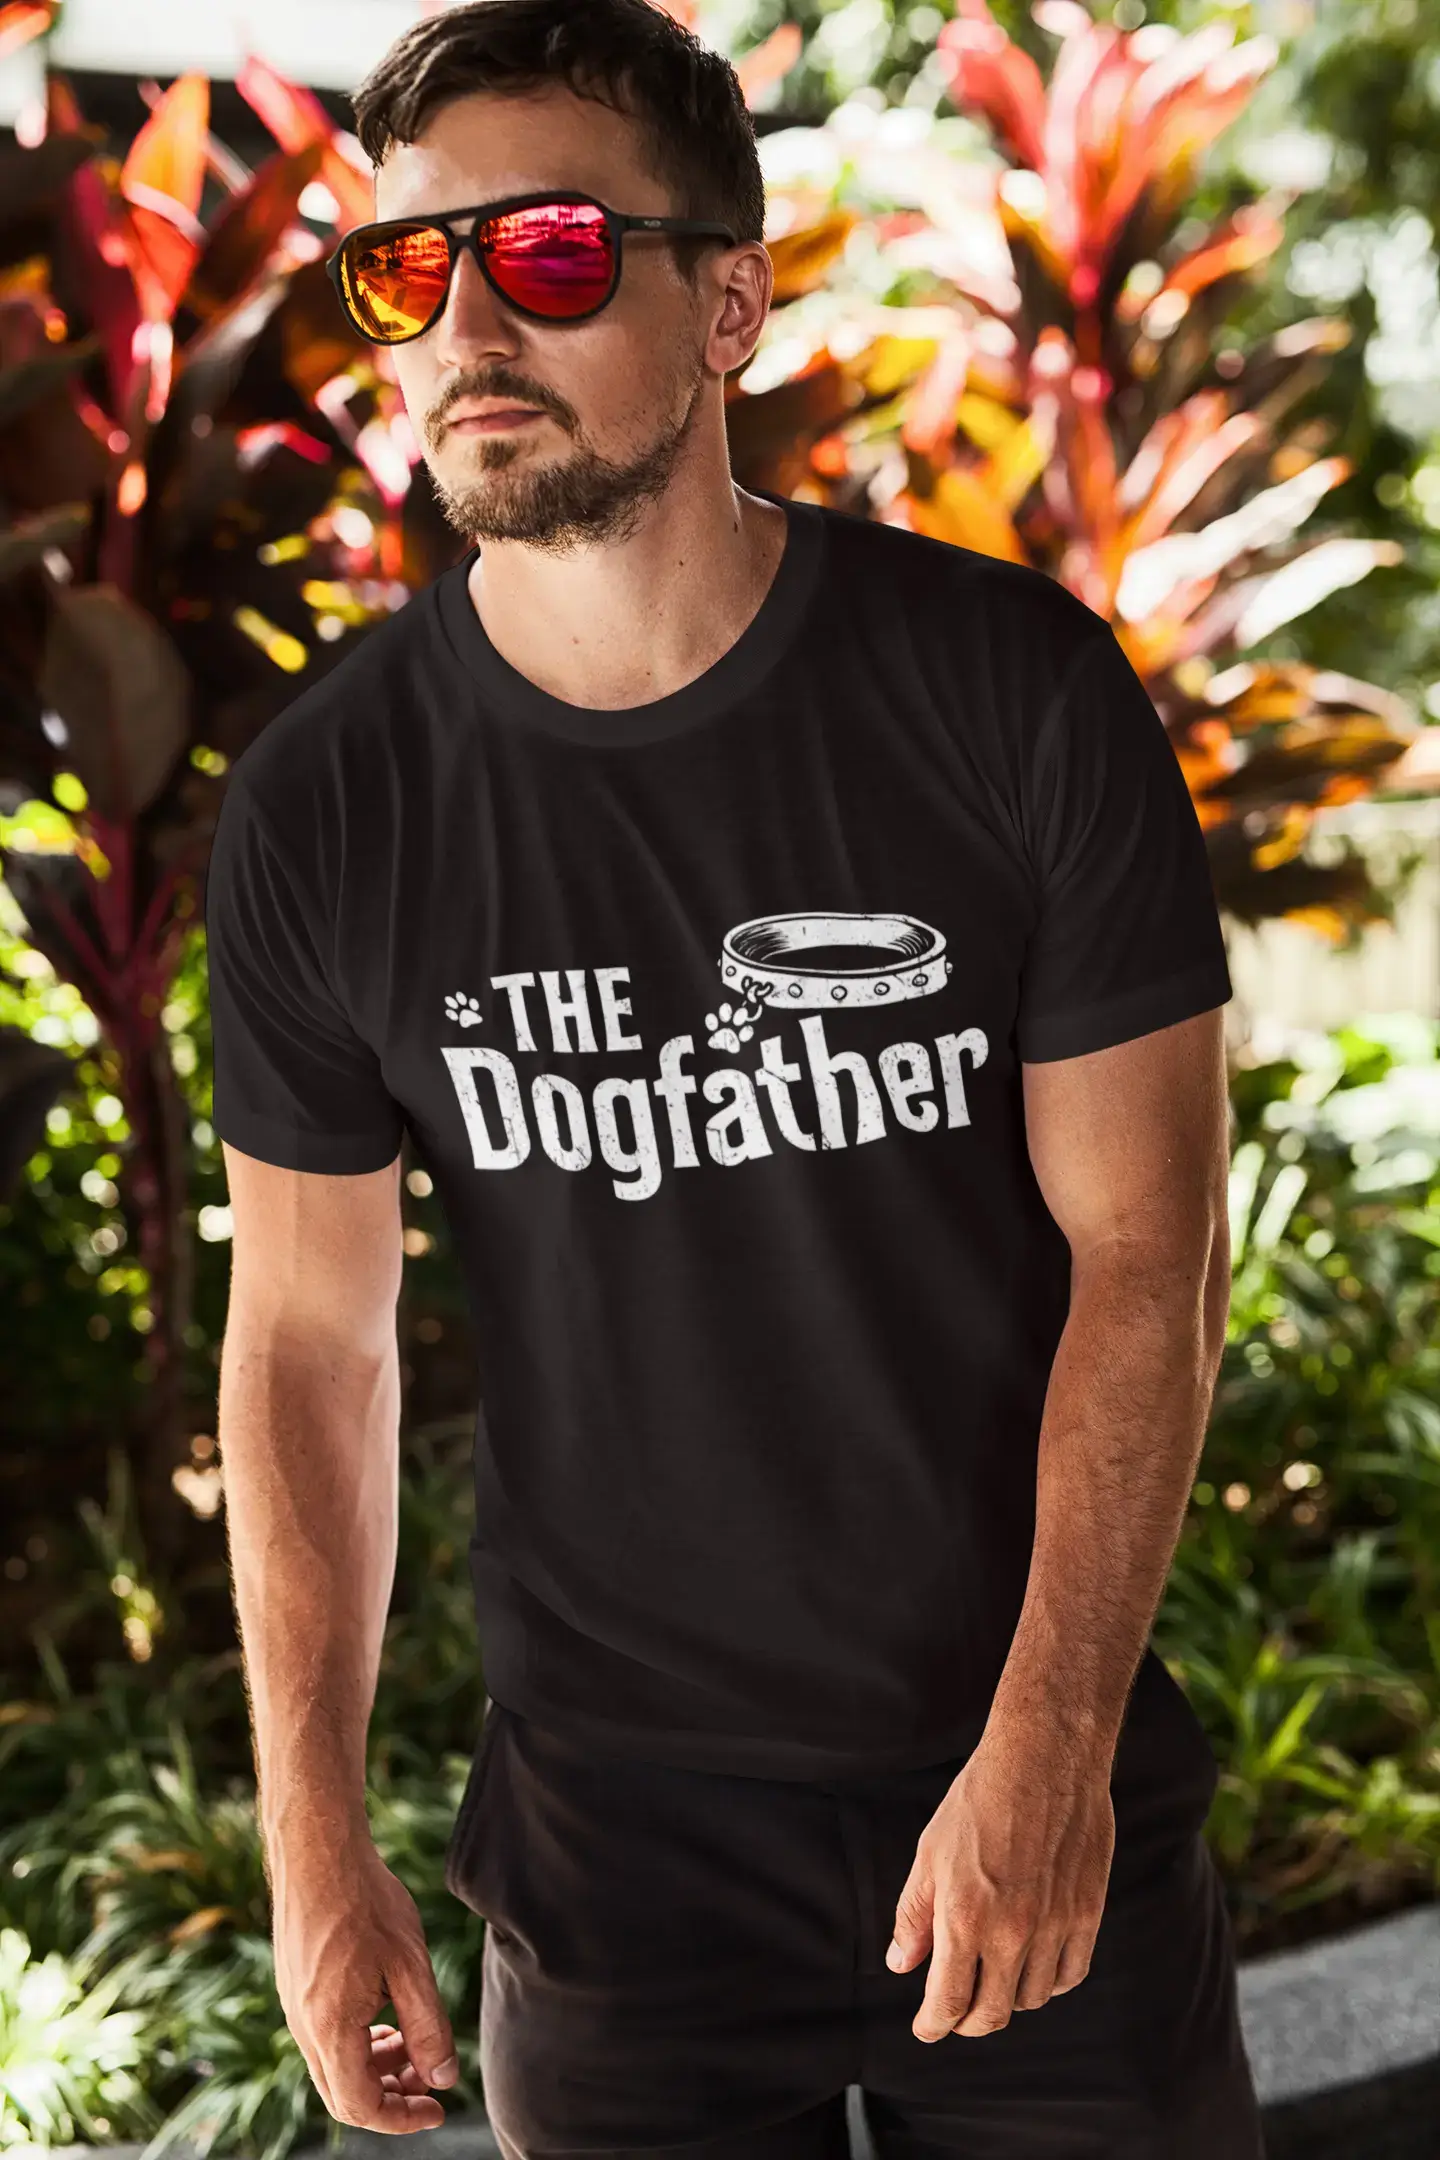 ULTRABASIC Men's Graphic T-Shirt The Dogfather - Cute Dog Paws - Vintage Shirt